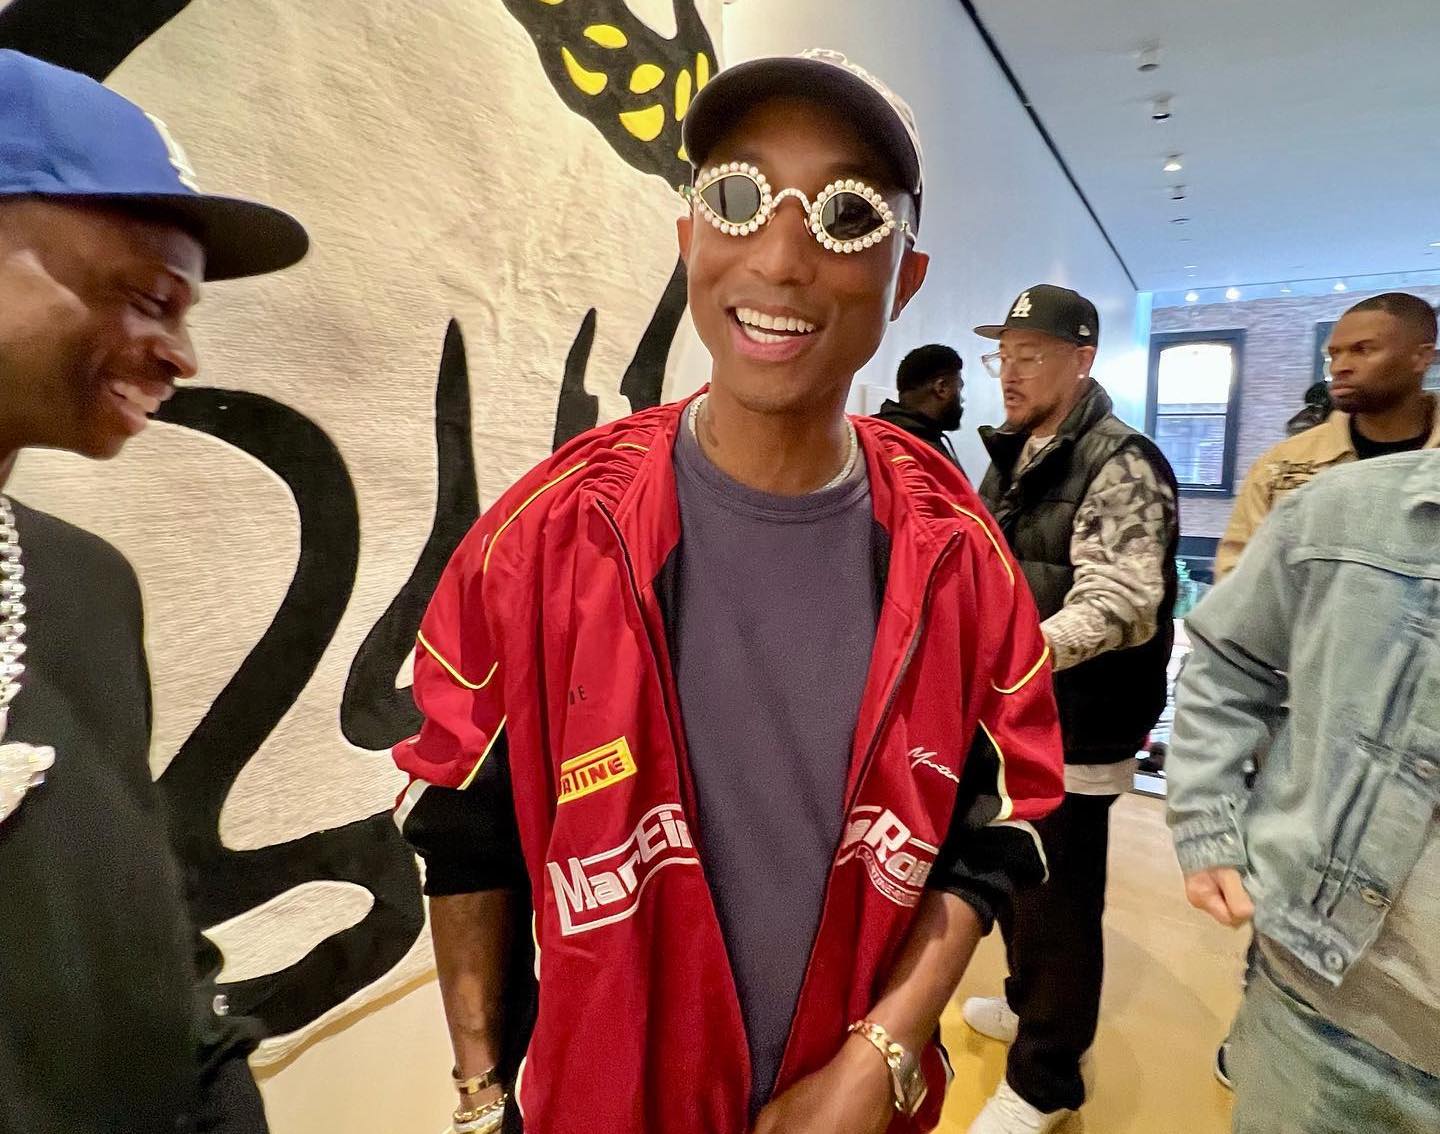 SPOTTED: Pharrell Williams attends #IKNOWNIGO Pop-Up in Martine Rose